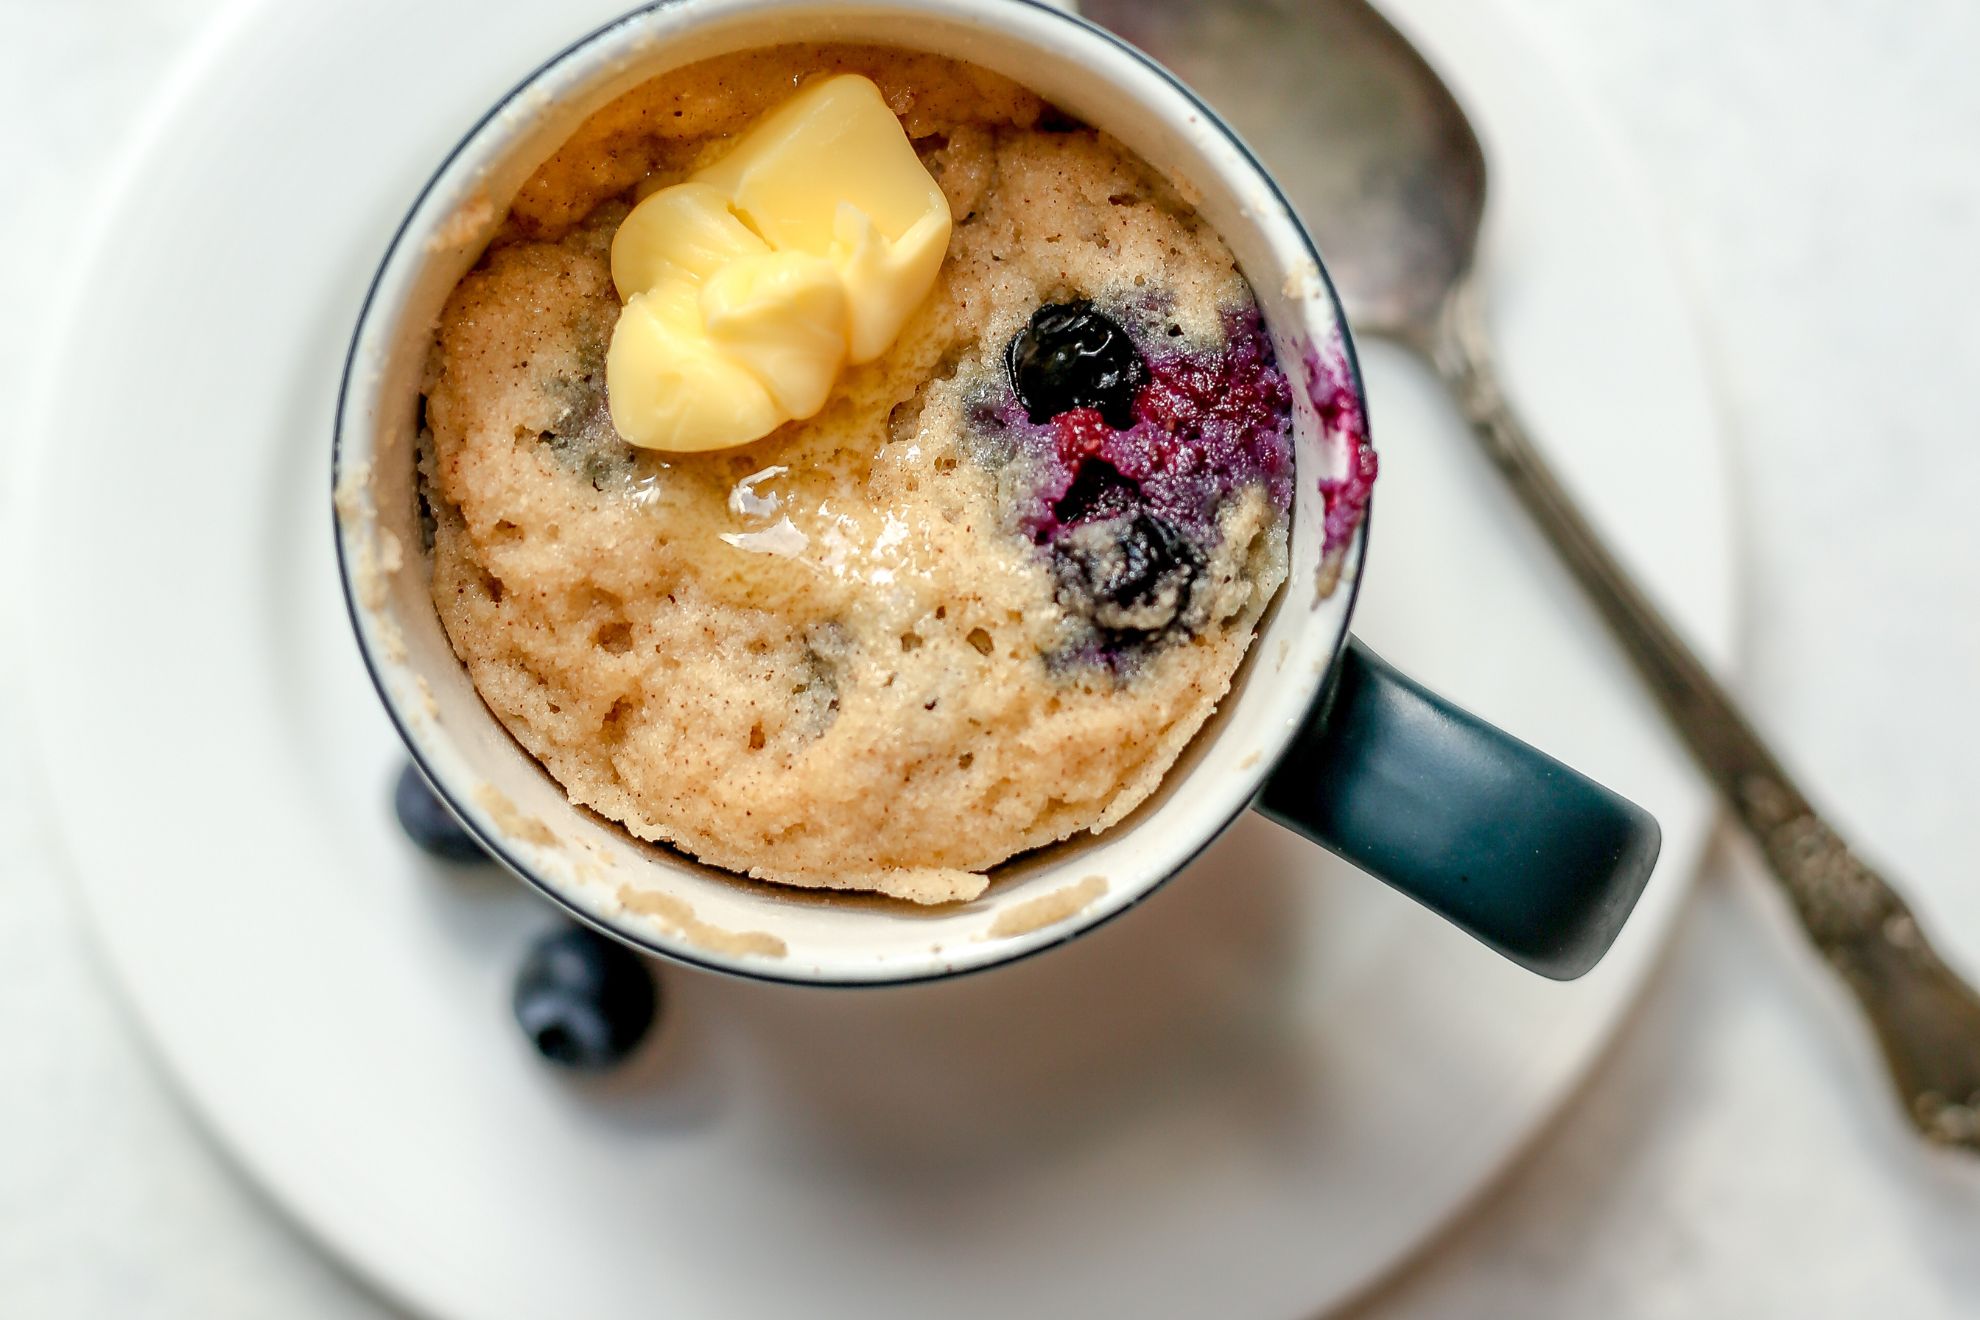 This is an overhead horizontal image of a tall grey mug with a white inside sitting on a small white plate with a silver spoon laying beside it. The plate sits on a white surface. In the mug is a blueberry cake/muffin topped with a pad of butter that is slightly melted.